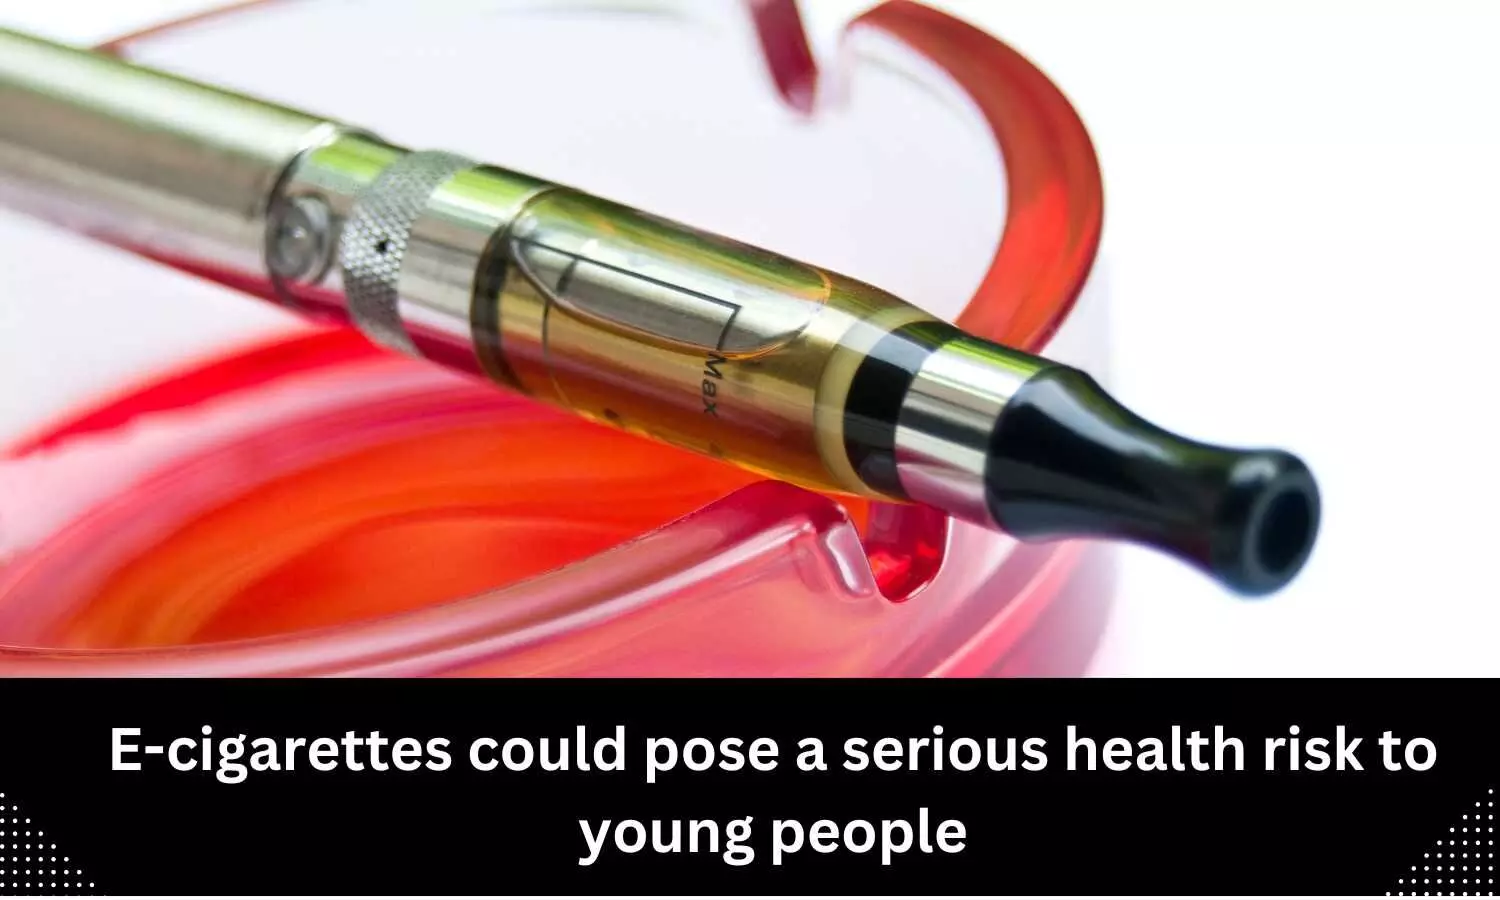 E-cigarettes could pose a serious health risk to young people